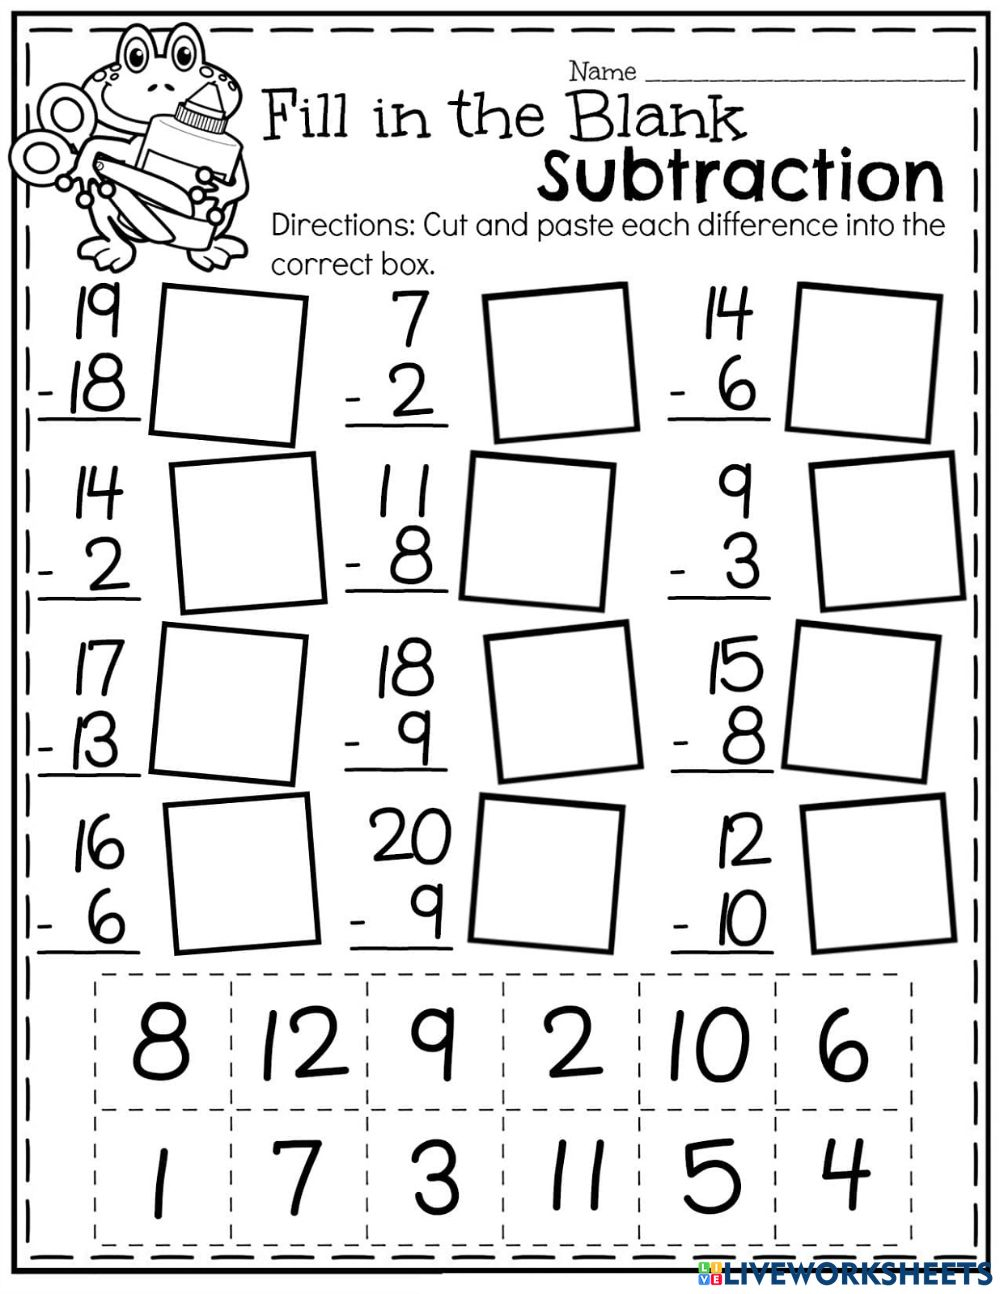 Subtraction Online Exercise For Grade 1